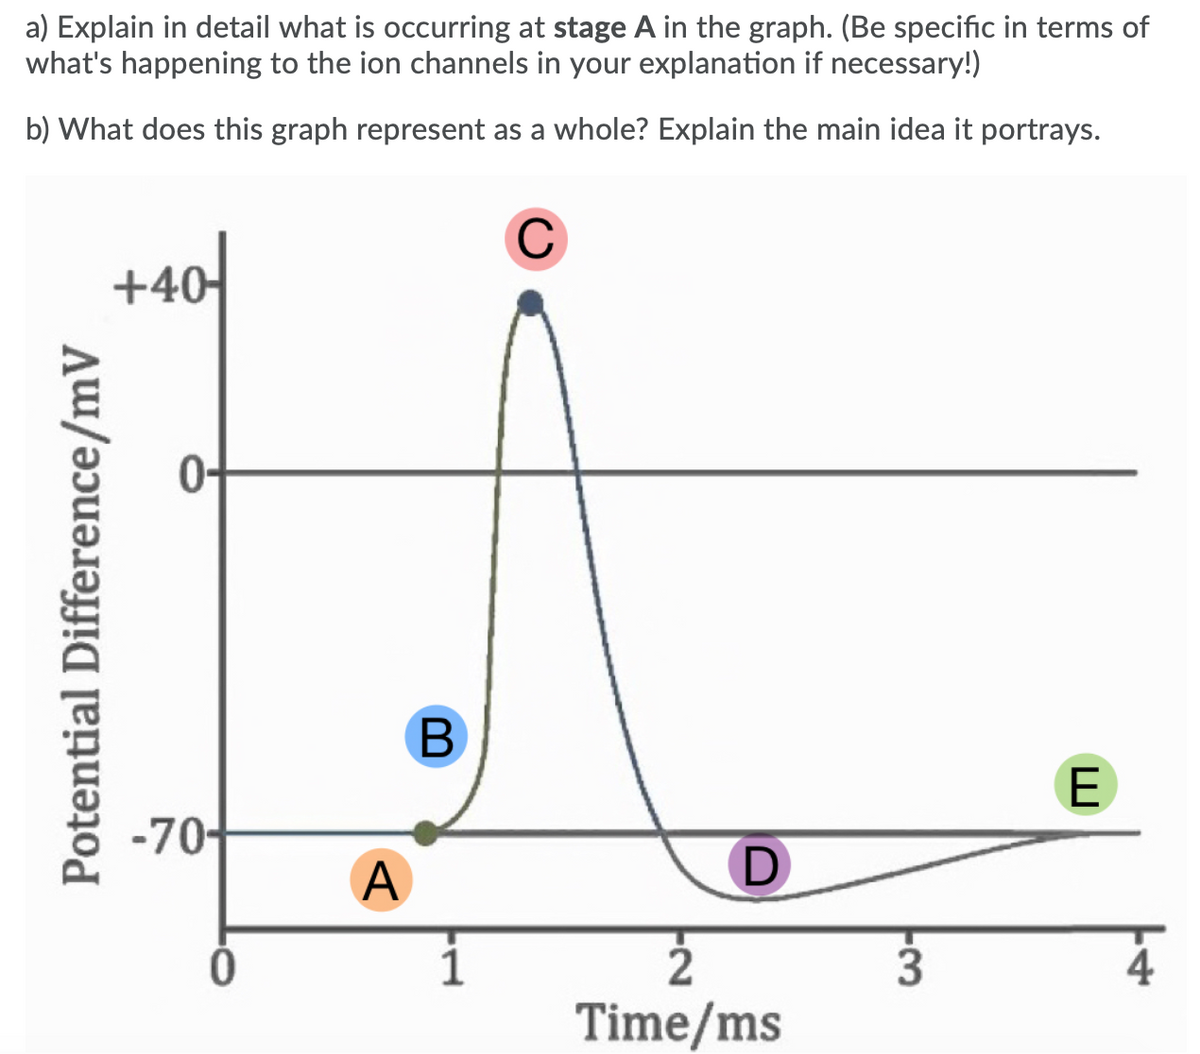 a) Explain in detail what is occurring at stage A in the graph. (Be specific in terms of
what's happening to the ion channels in your explanation if necessary!)
b) What does this graph represent as a whole? Explain the main idea it portrays.
+40|
-70-
A
1
2
4
Time/ms
Potential Difference/mV
B
